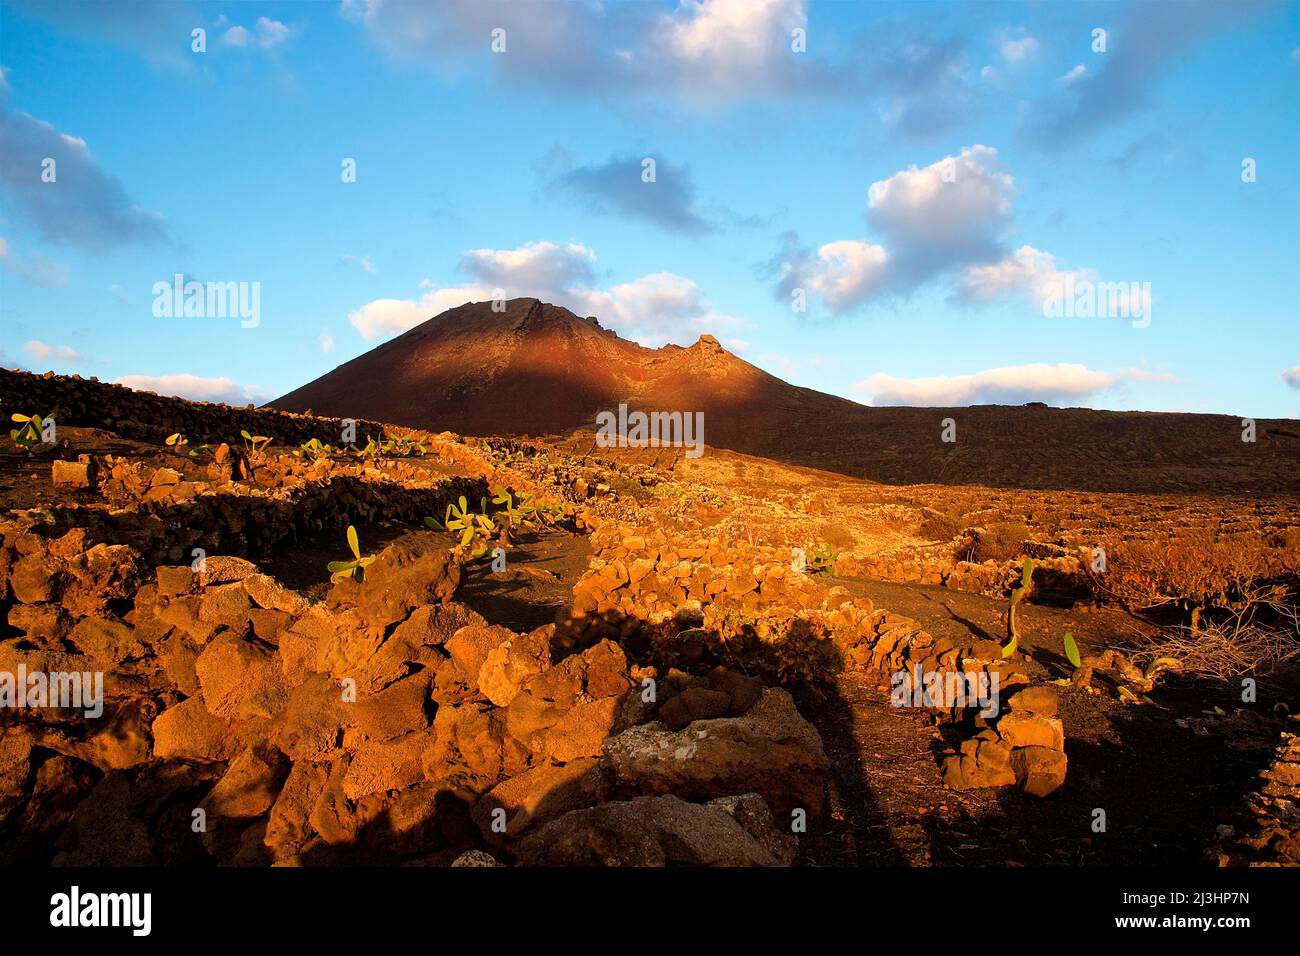 Canary Islands, Lanzarote, volcanic island, volcanic landscape in the north in the morning light, walls of lava rock, volcanic hills in the morning light, sky blue and clear with gray and white clouds Stock Photo